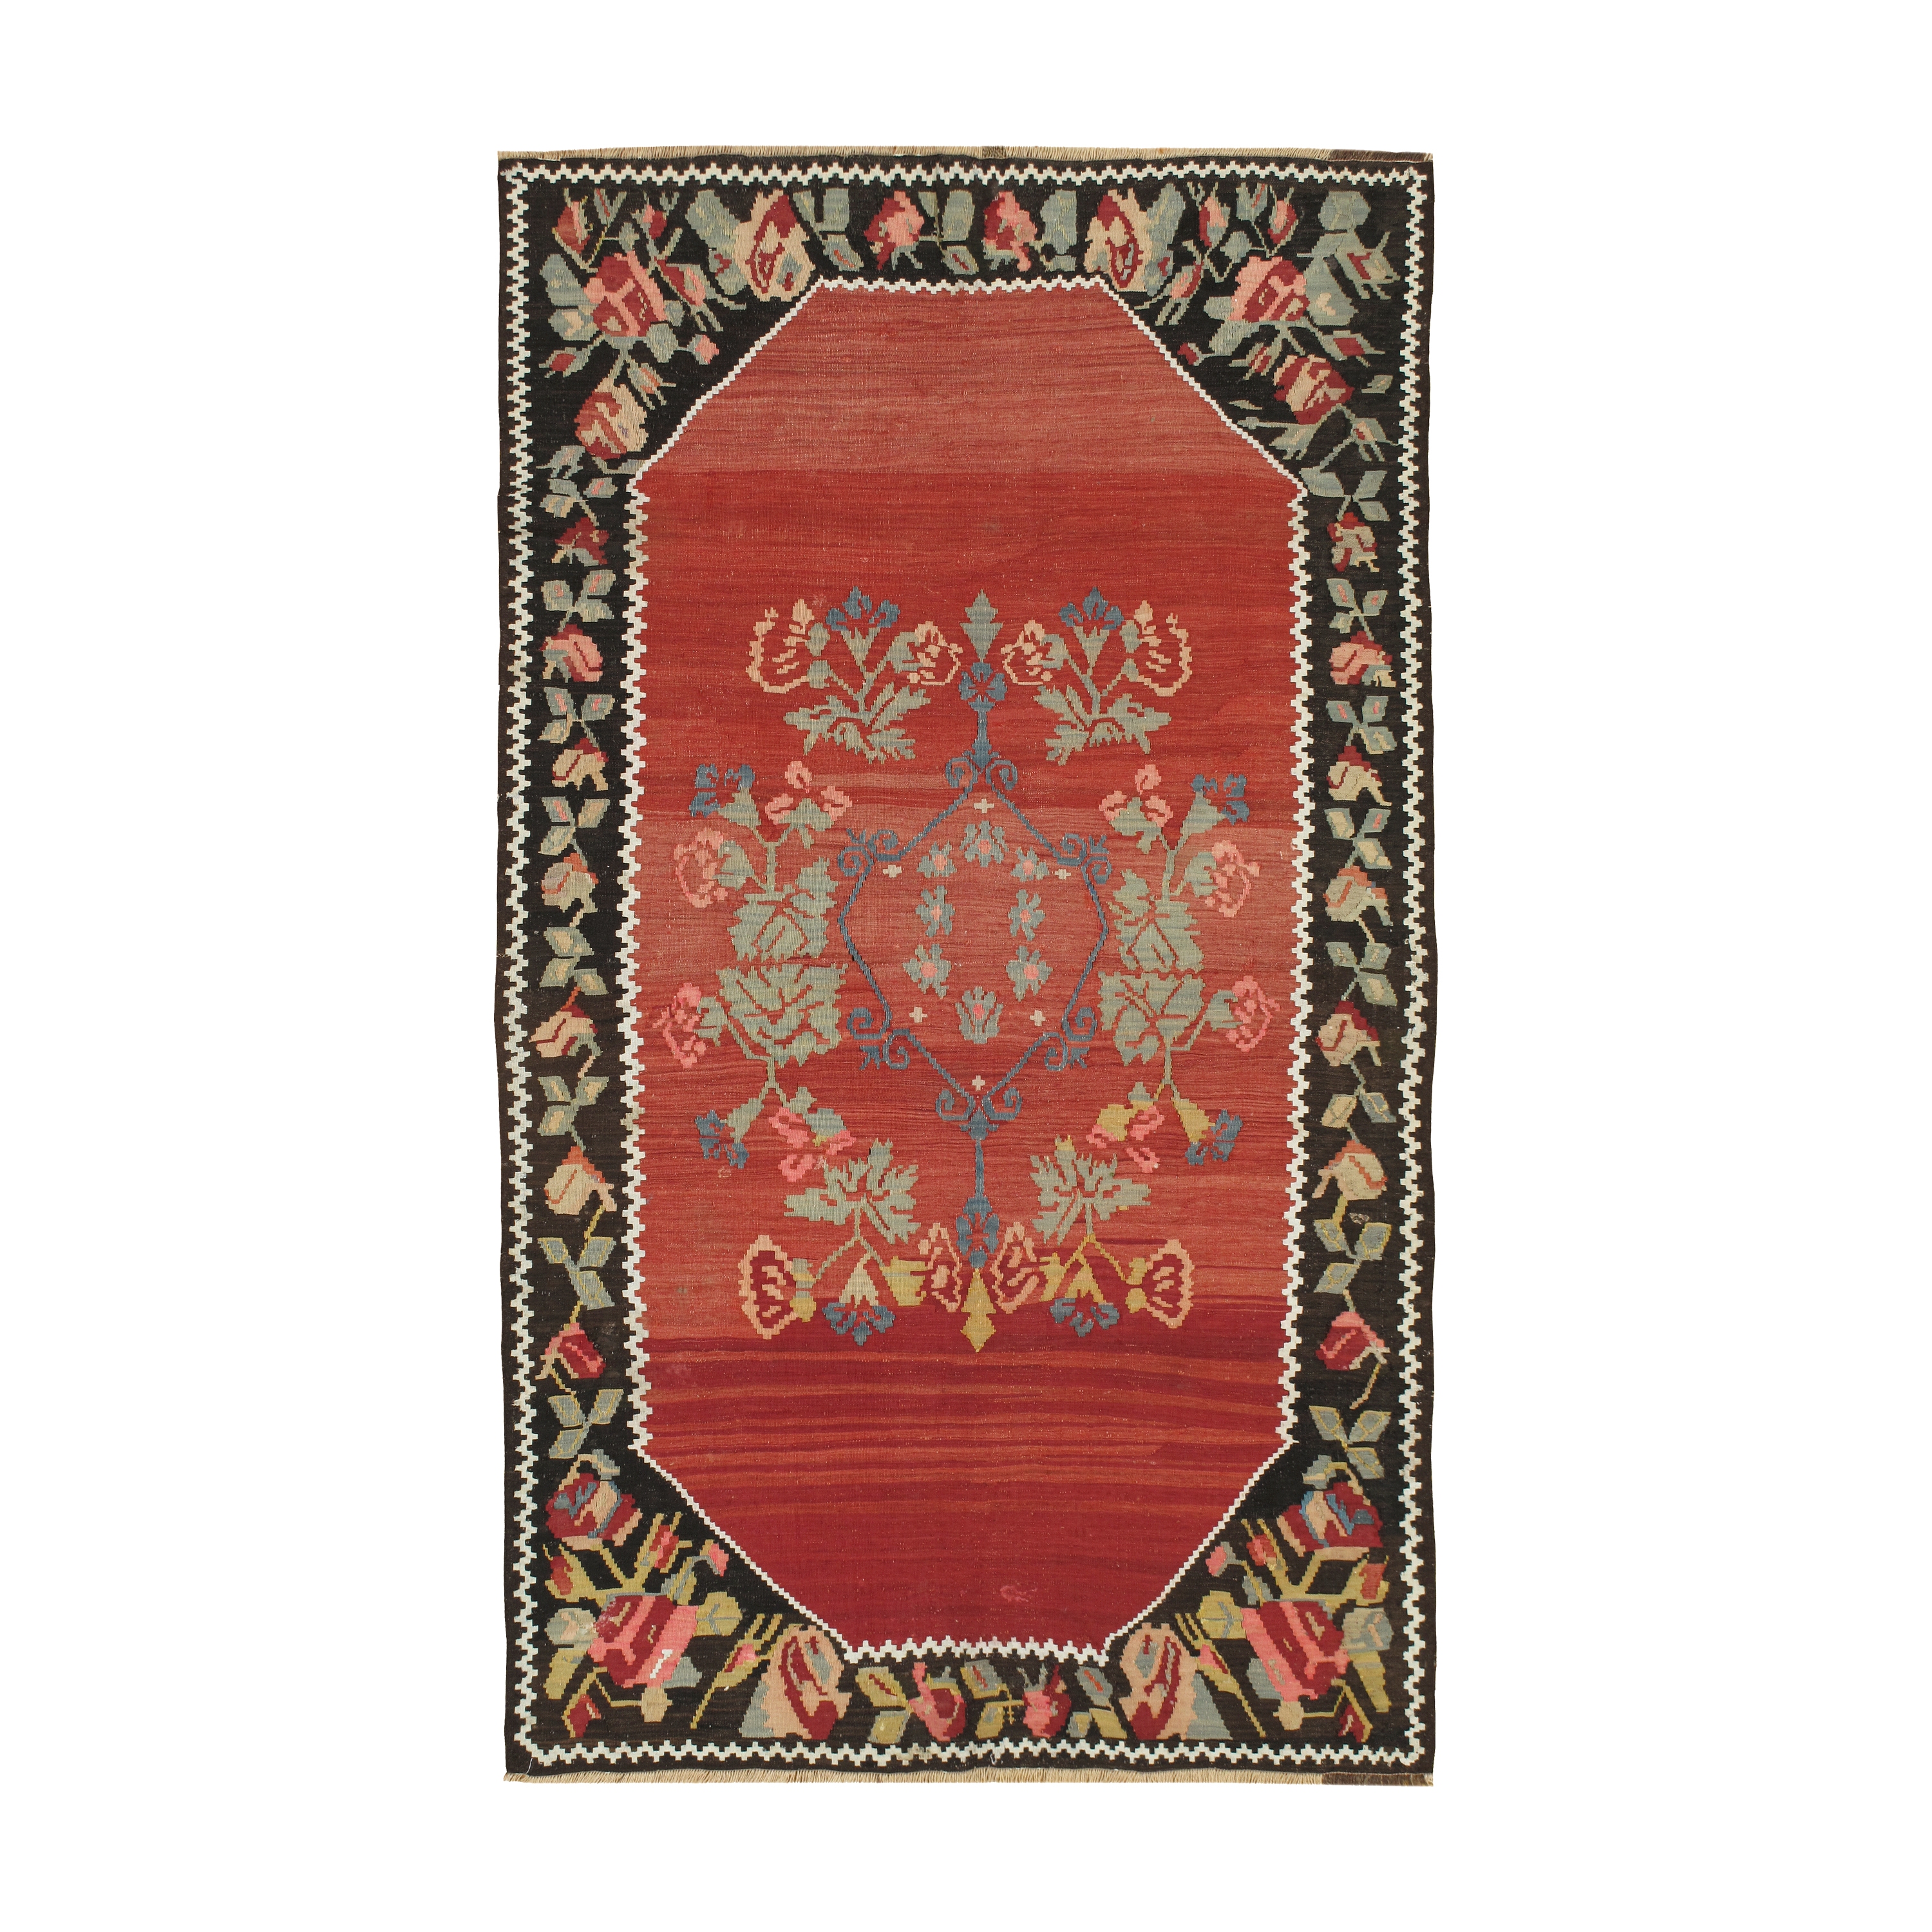 Antique Karabagh is an antique Caucasian tribal flatweave rug from Karabagh, featuring an articulated geometric pattern with European influence